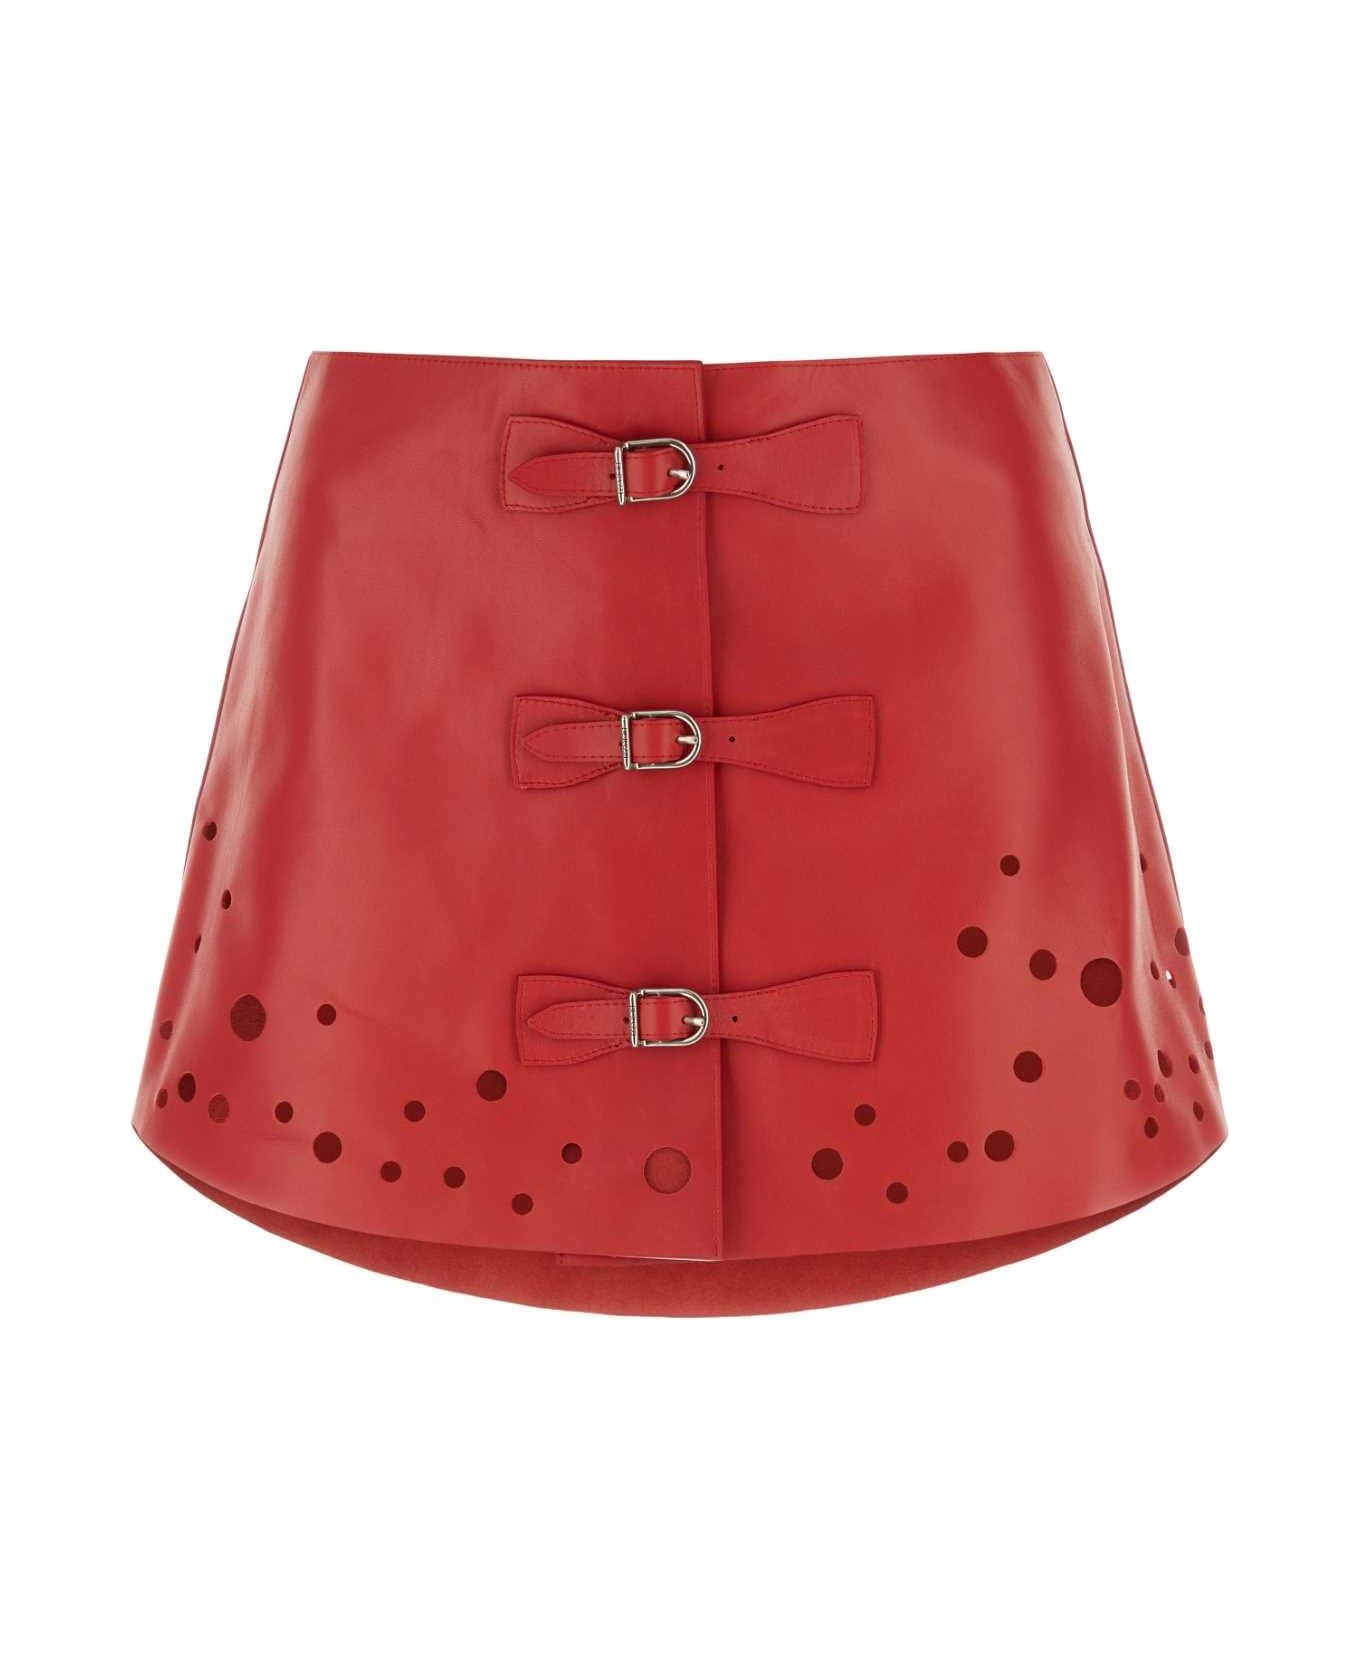 Durazzi Milano Red Leather Mini Skirt - RED